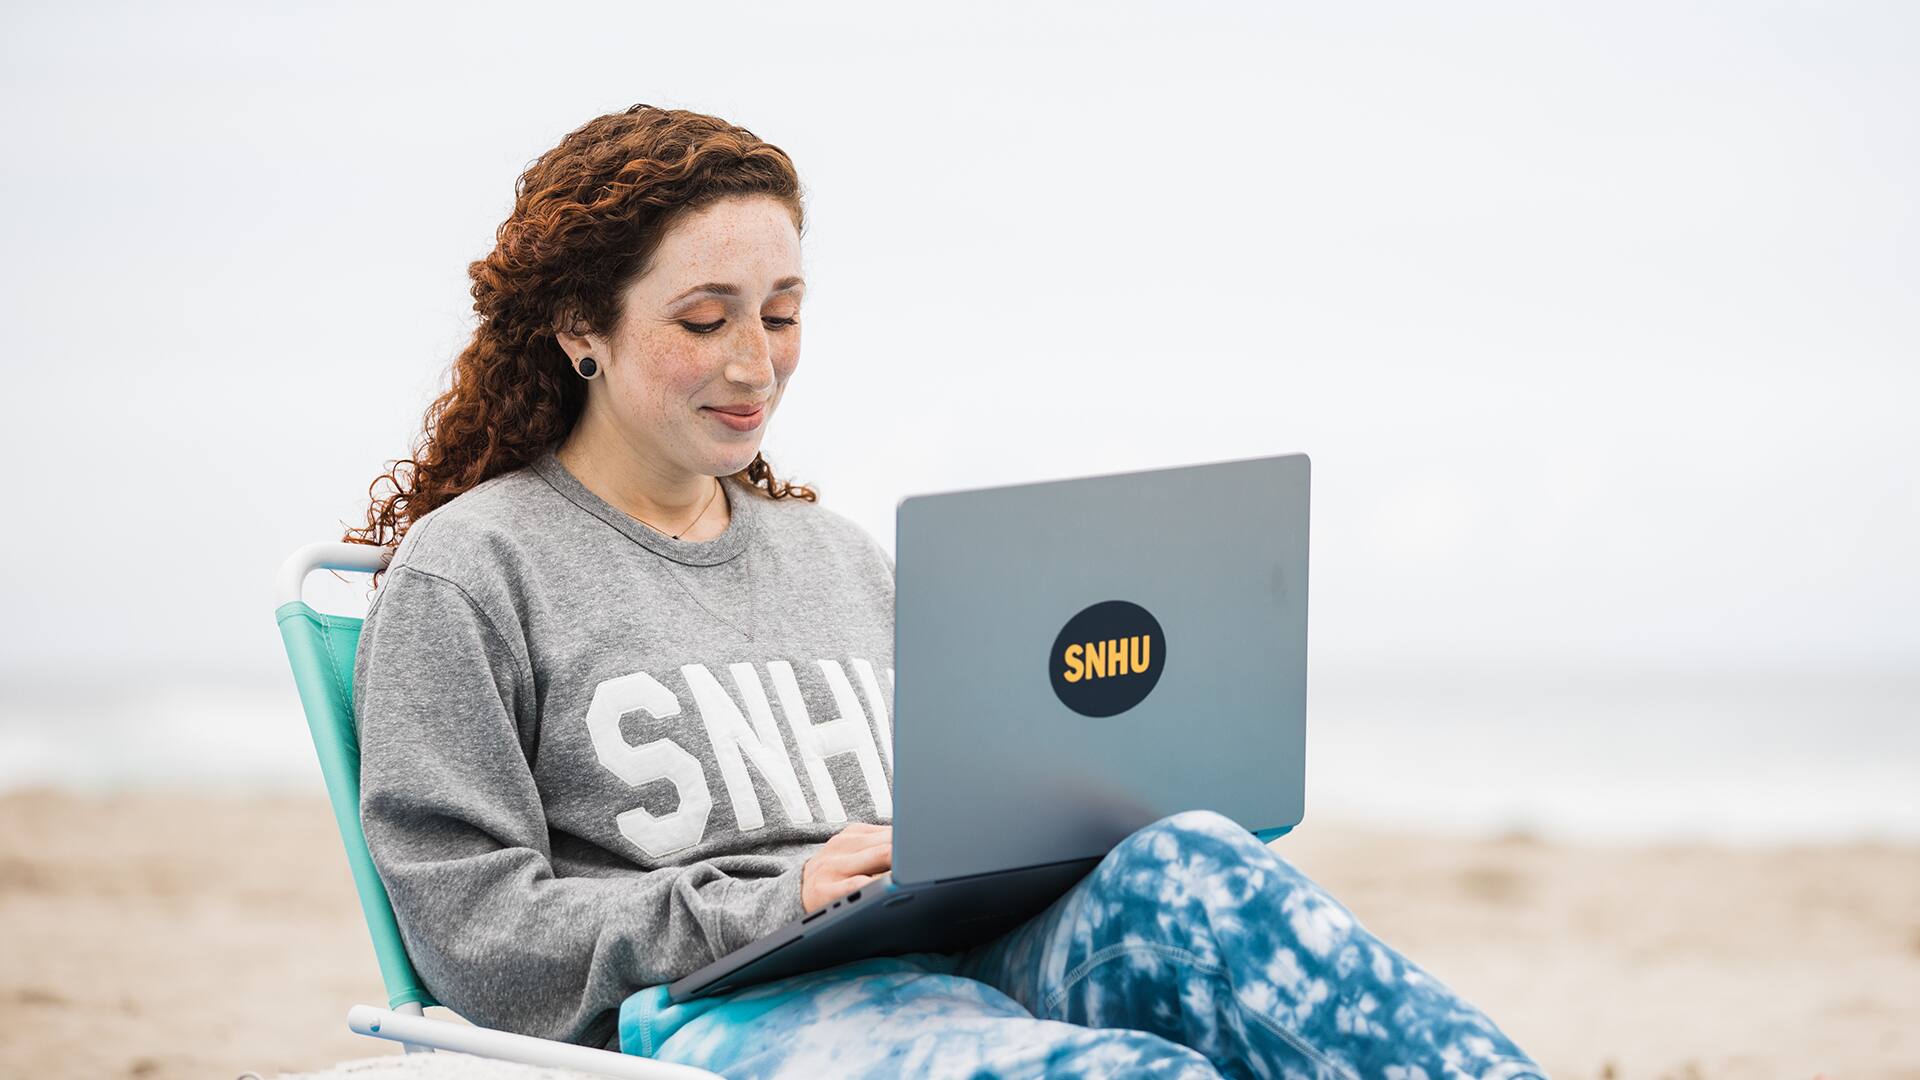 Mariel Embry, who earned her degree in creative writing and English, wearing a grey SNHU sweatshirt sitting in a foldable chair on the beach and working on her laptop.